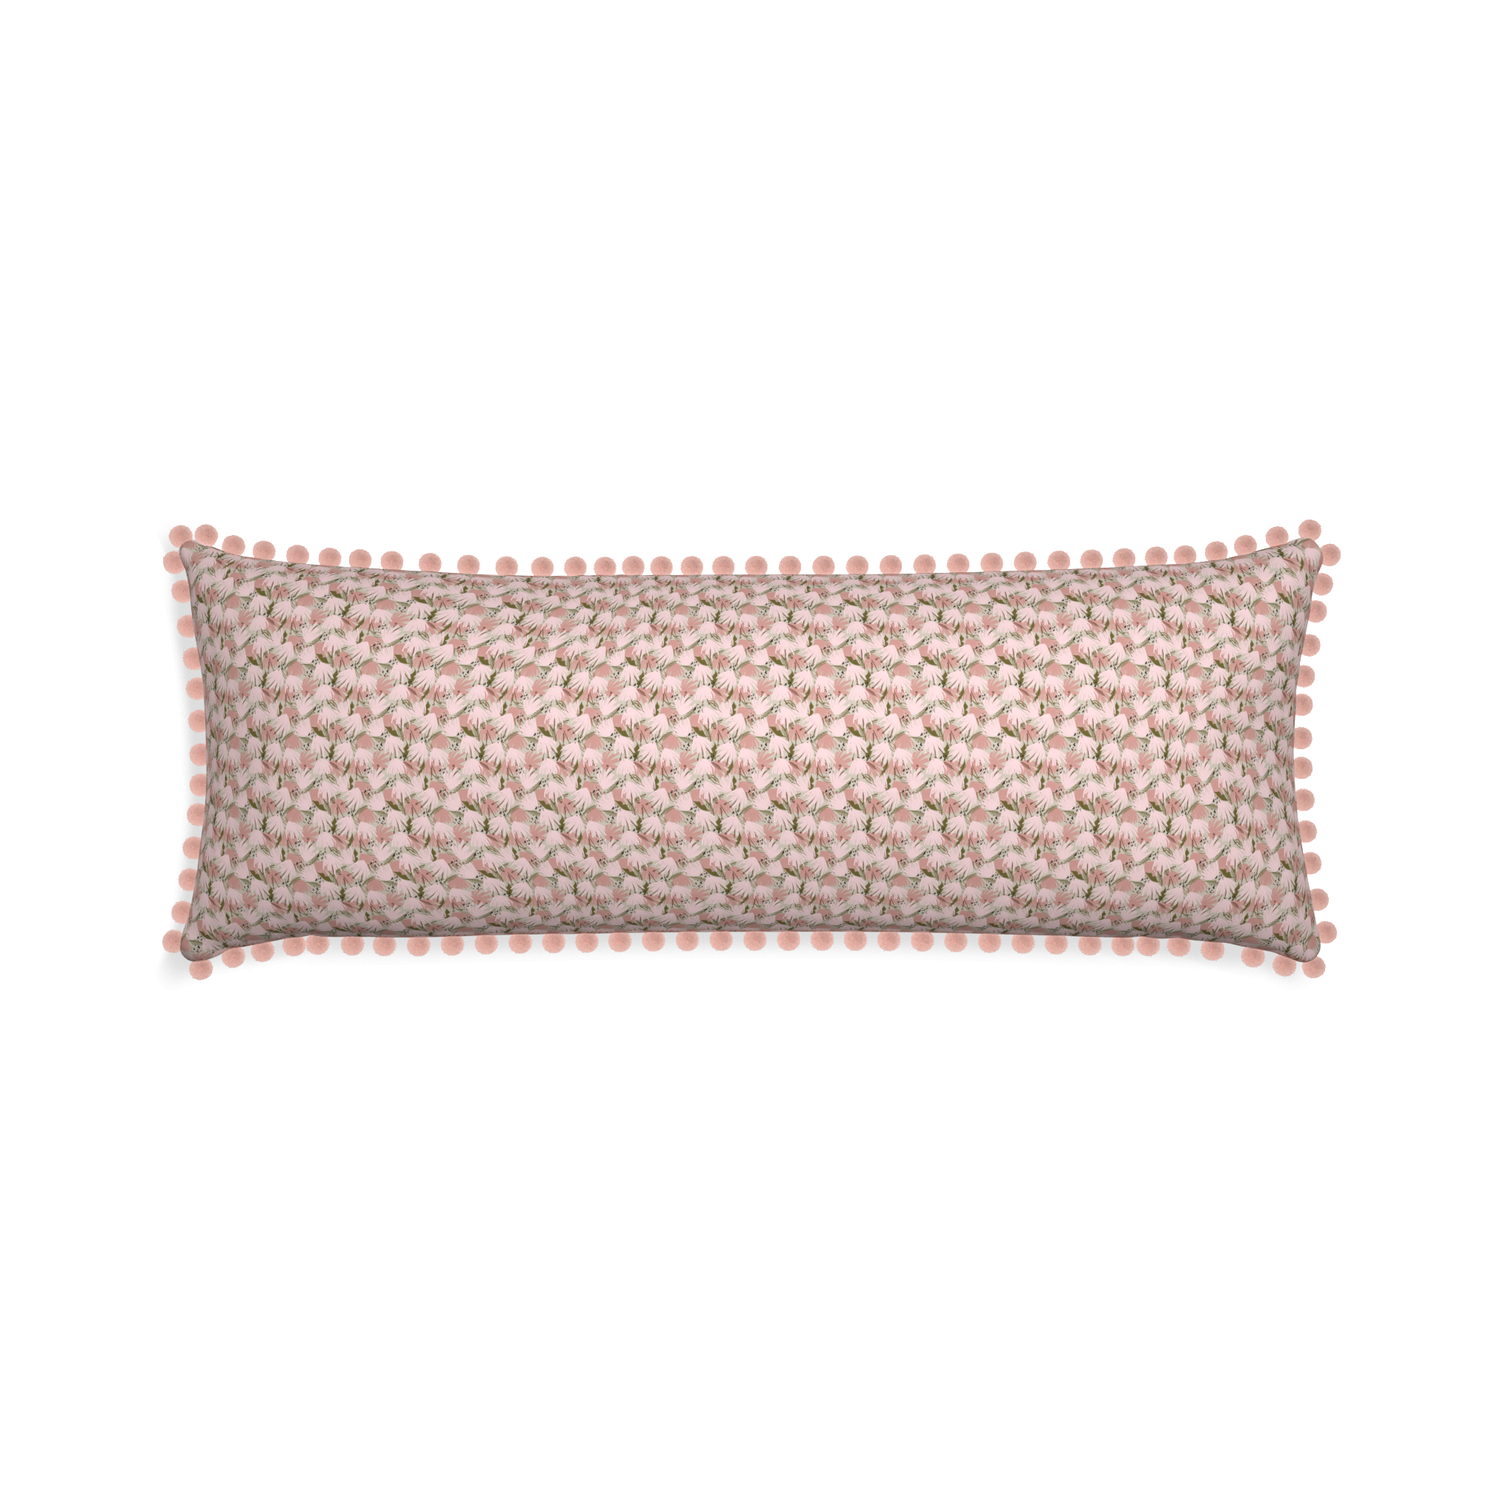 Xl-lumbar eden pink custom pink floralpillow with rose pom pom on white background